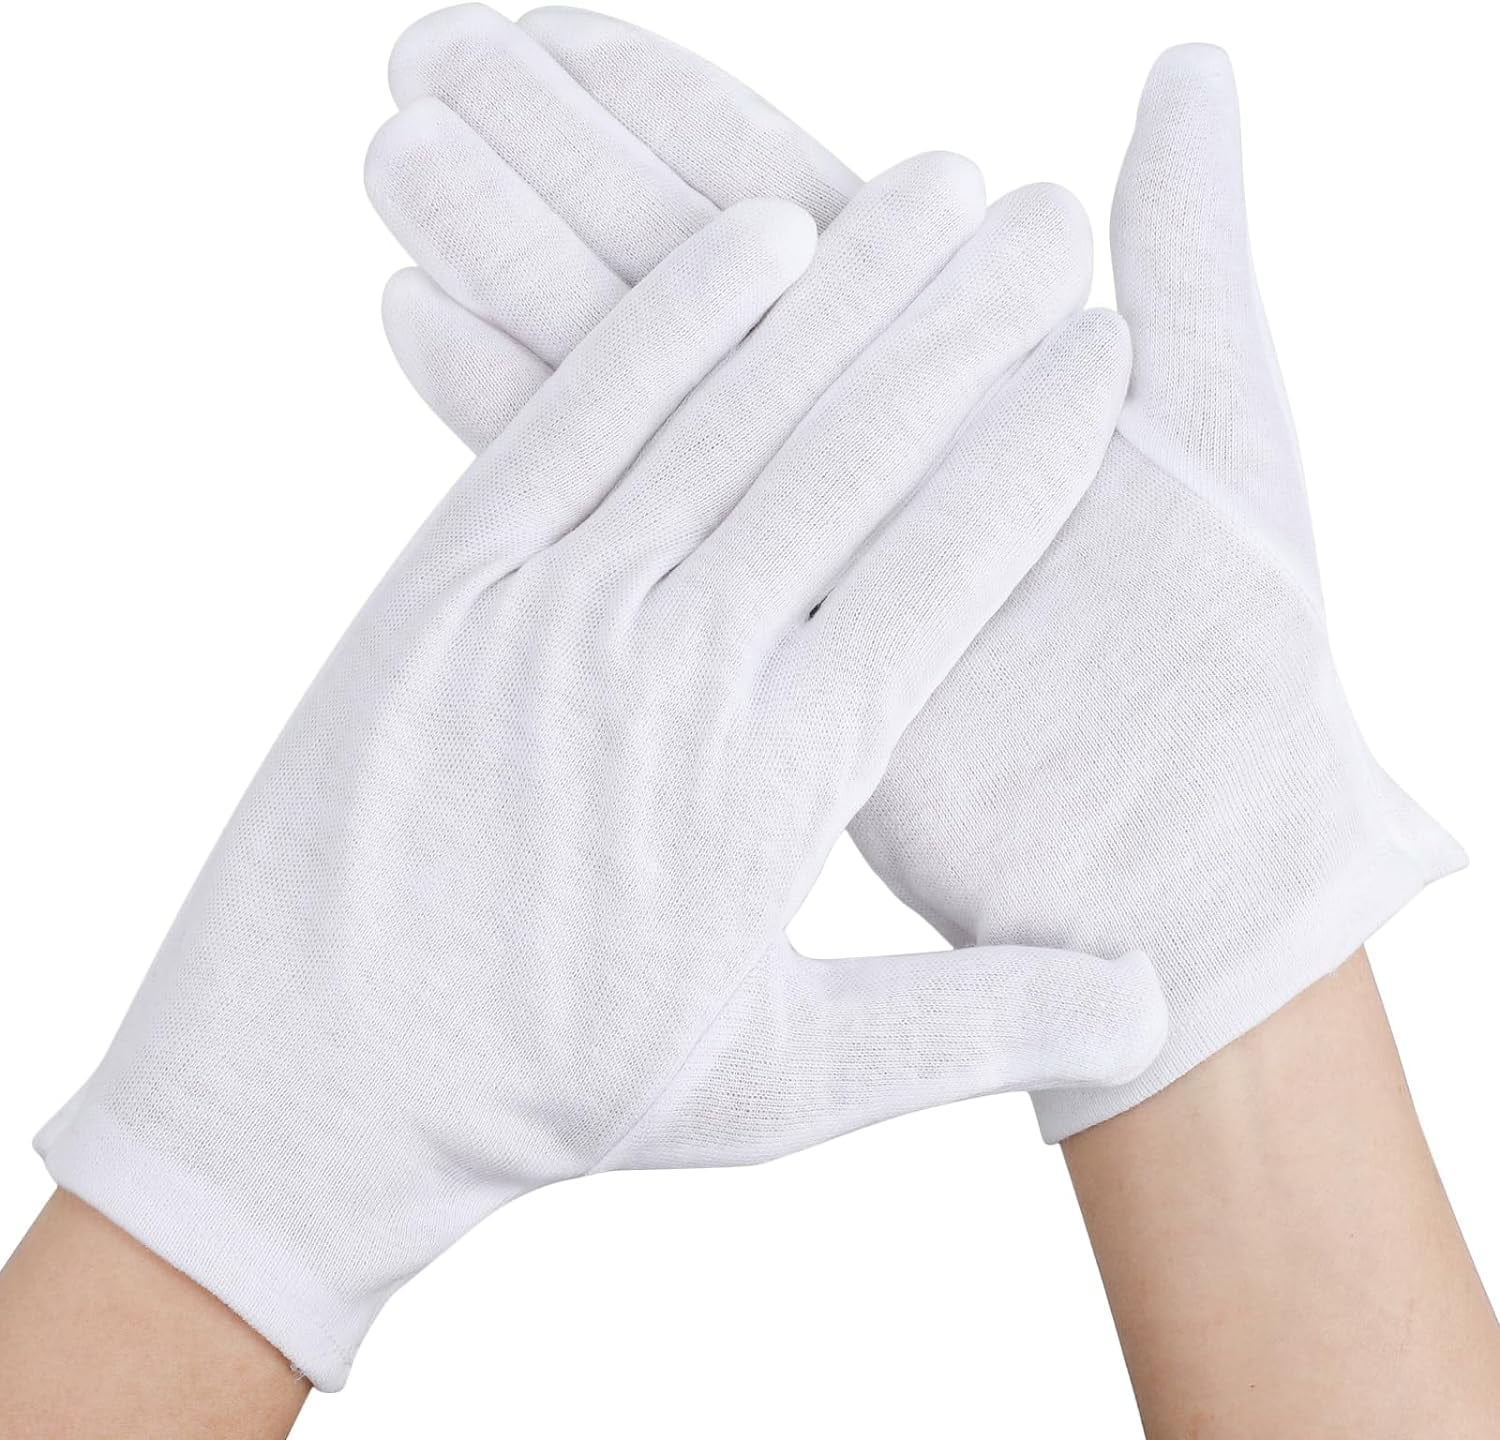 Moisturizing Gloves Overnight, 12 Pairs Thick Cotton Gloves for Dry ...